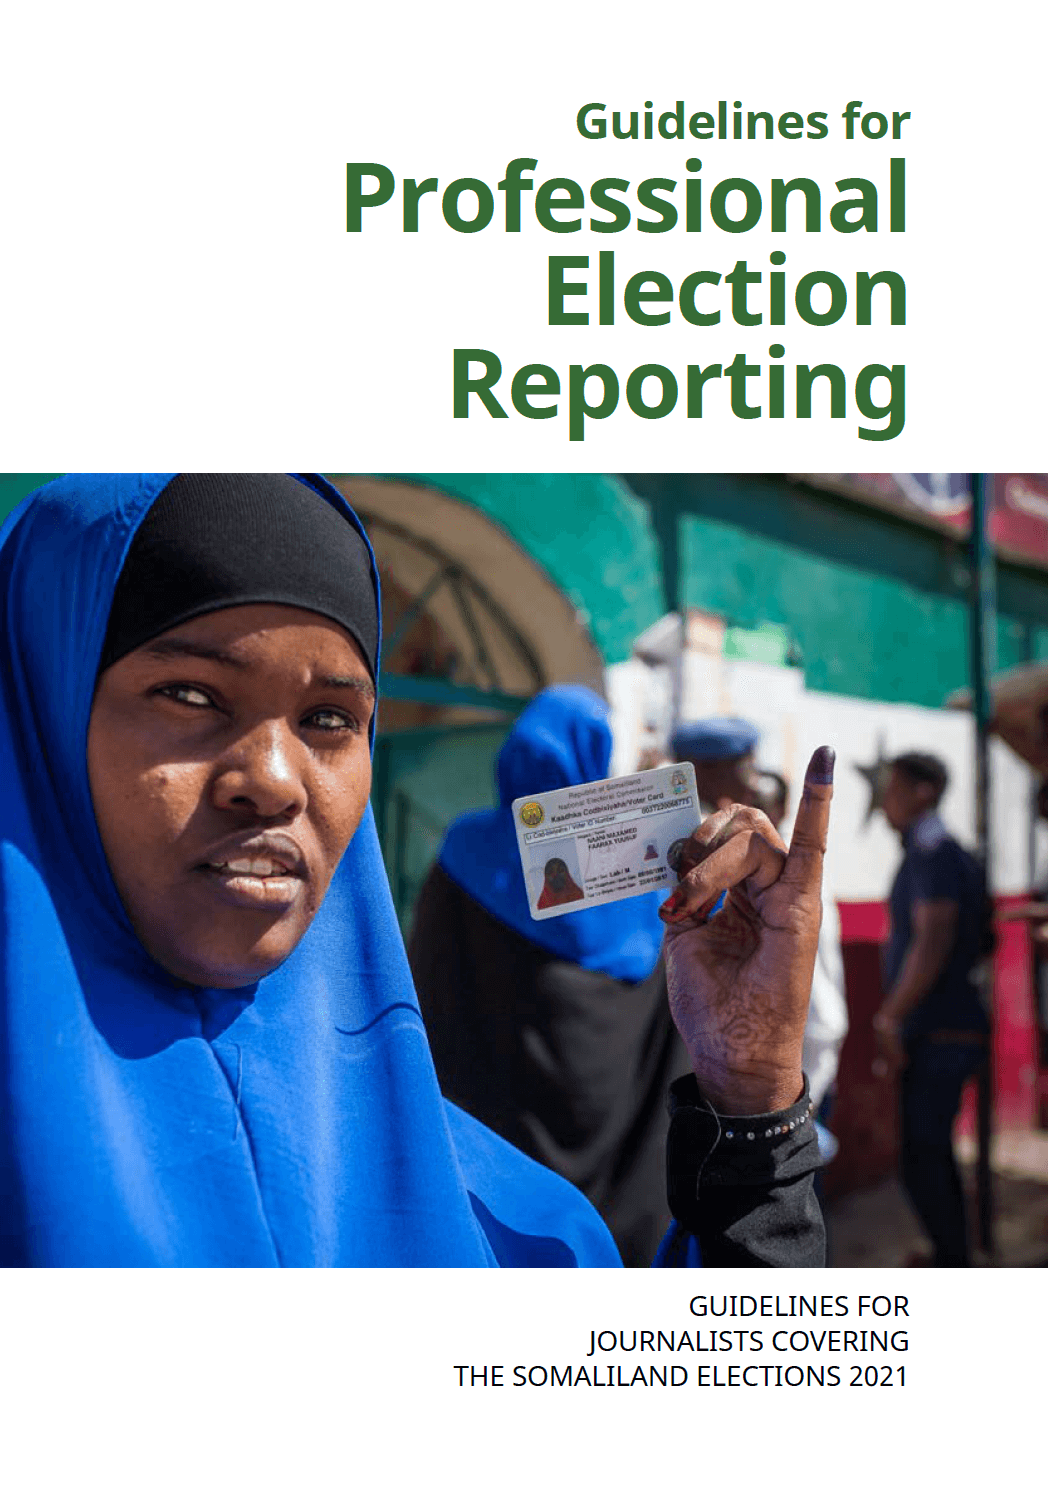 Guidelines for journalists covering the Somaliland Elections 2021